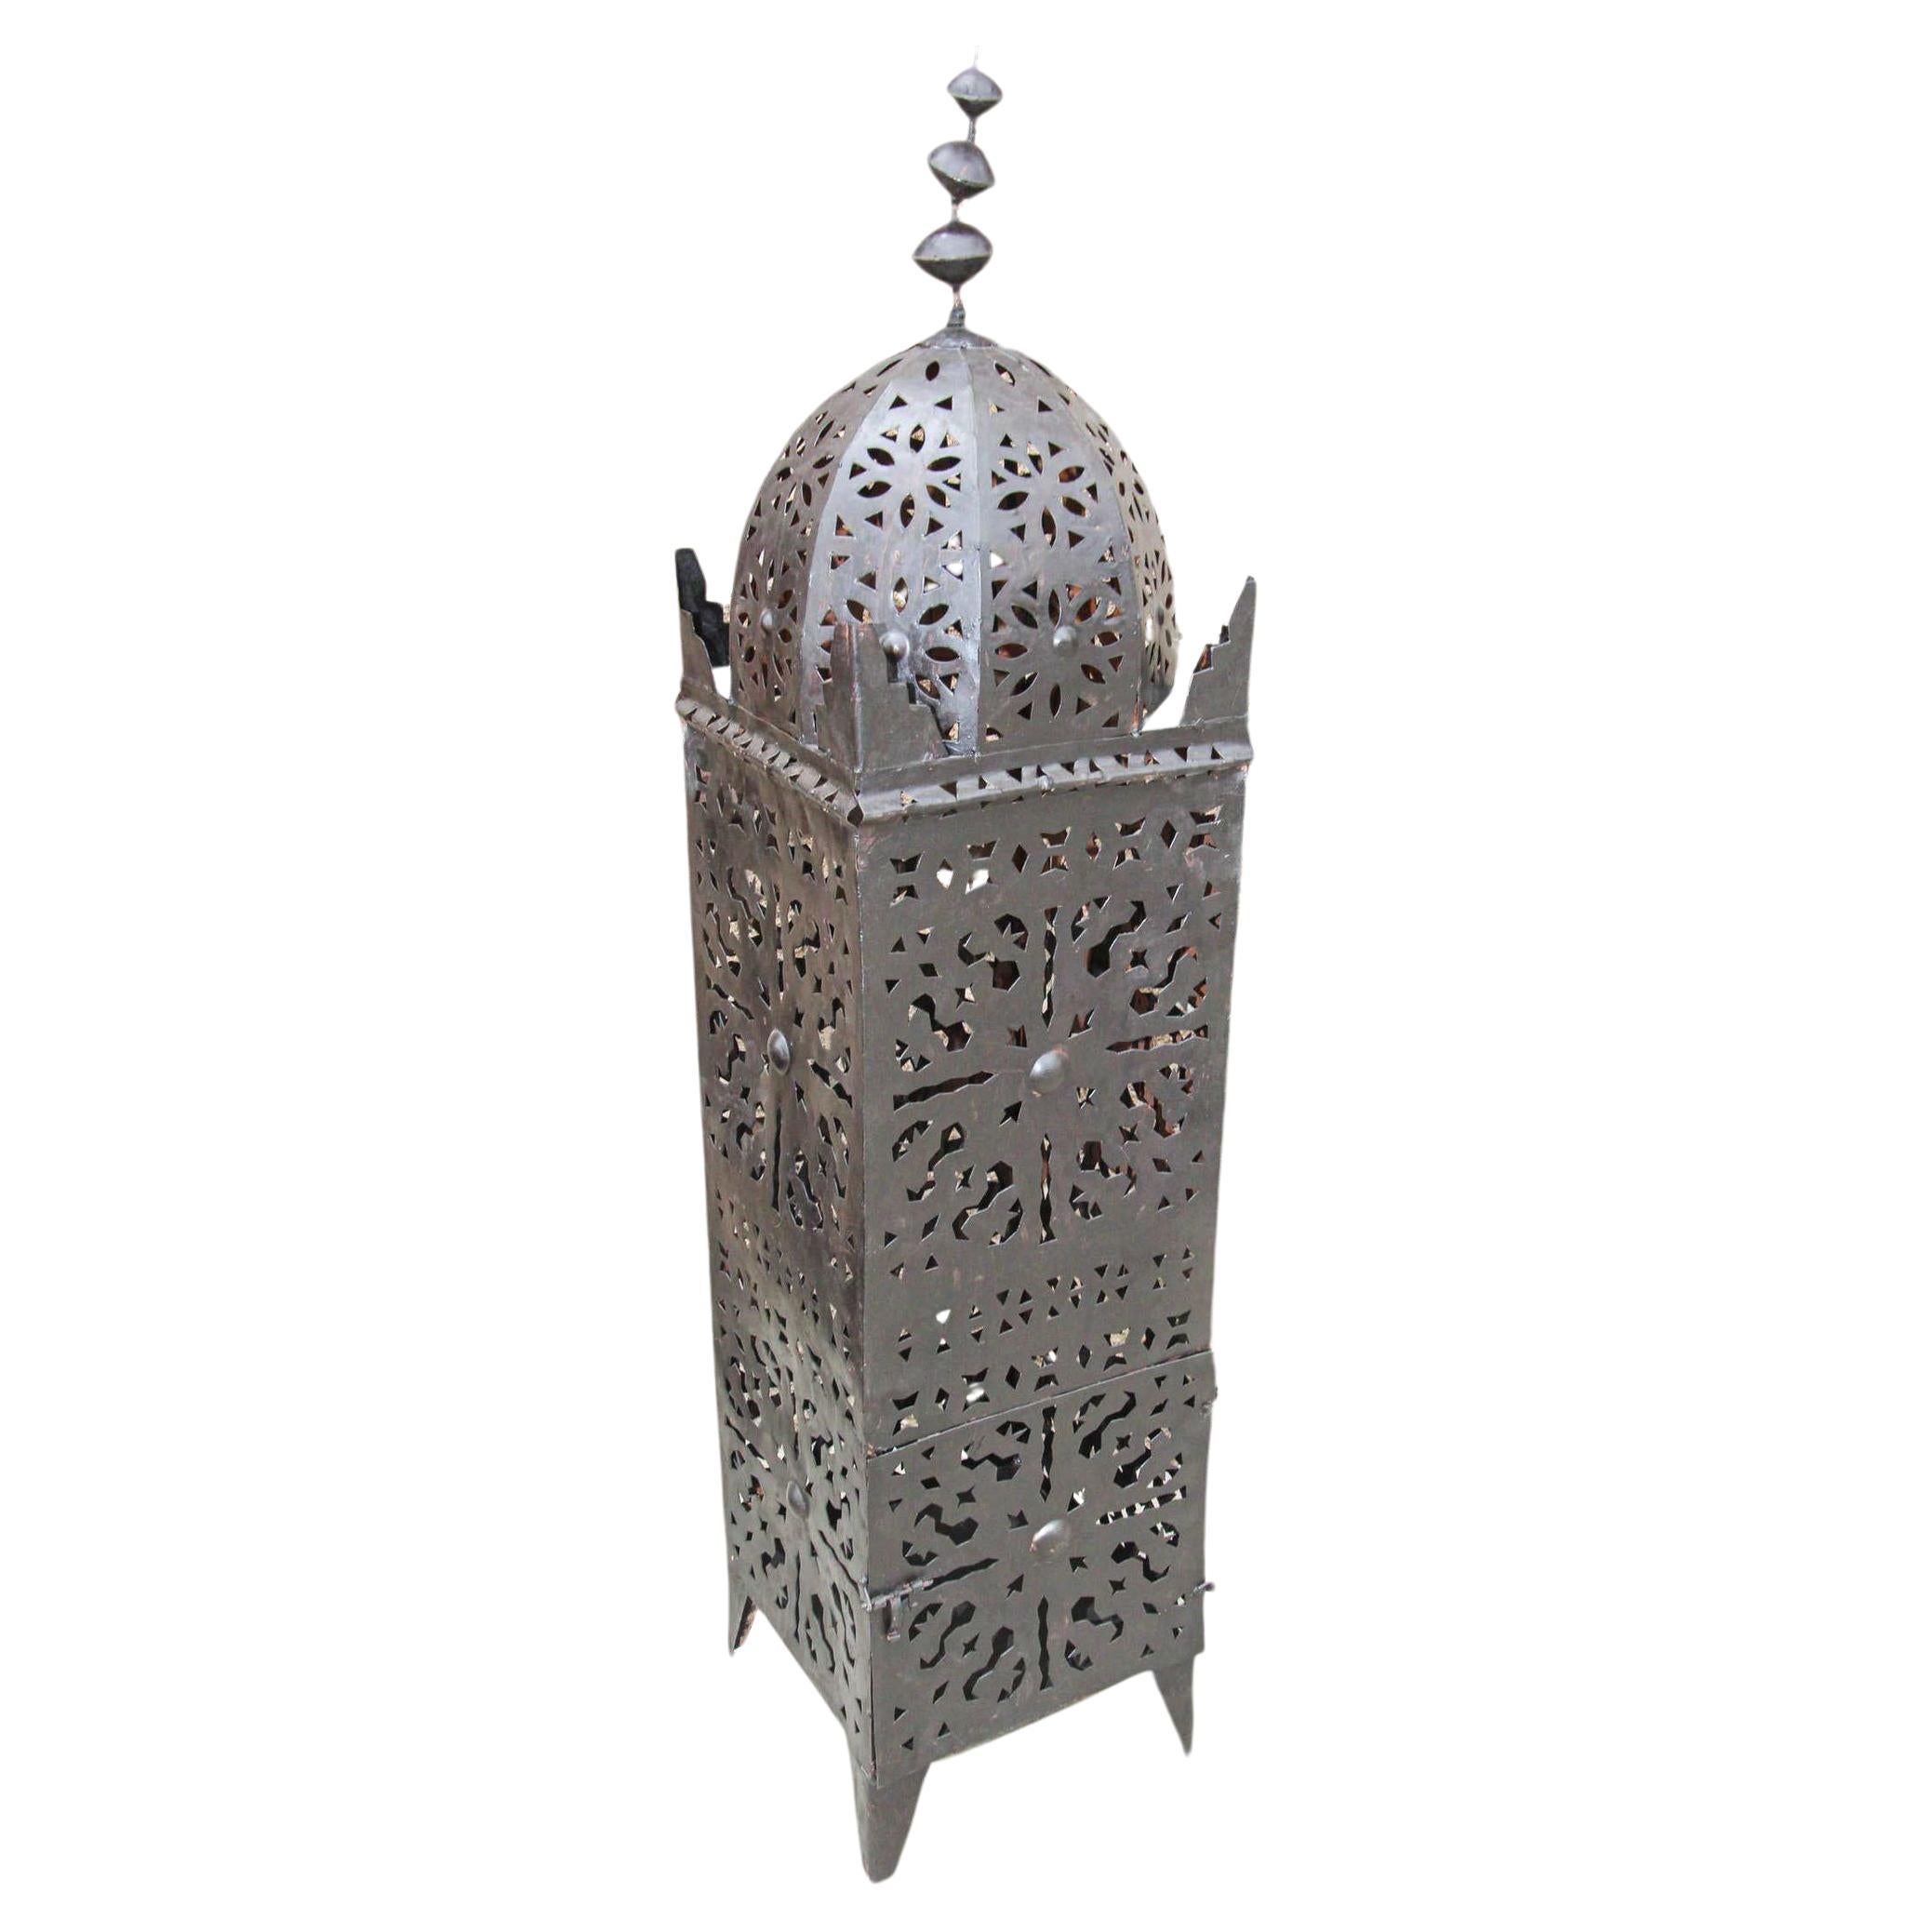 Large outdoor vintage Moroccan metal candle lantern.
Hurricane Kasbah shaped candle lamp handcrafted in Morocco by artisans, metal hand-cut and hammered, opening in front for use with pillar candles.
The lantern has a small door to access the